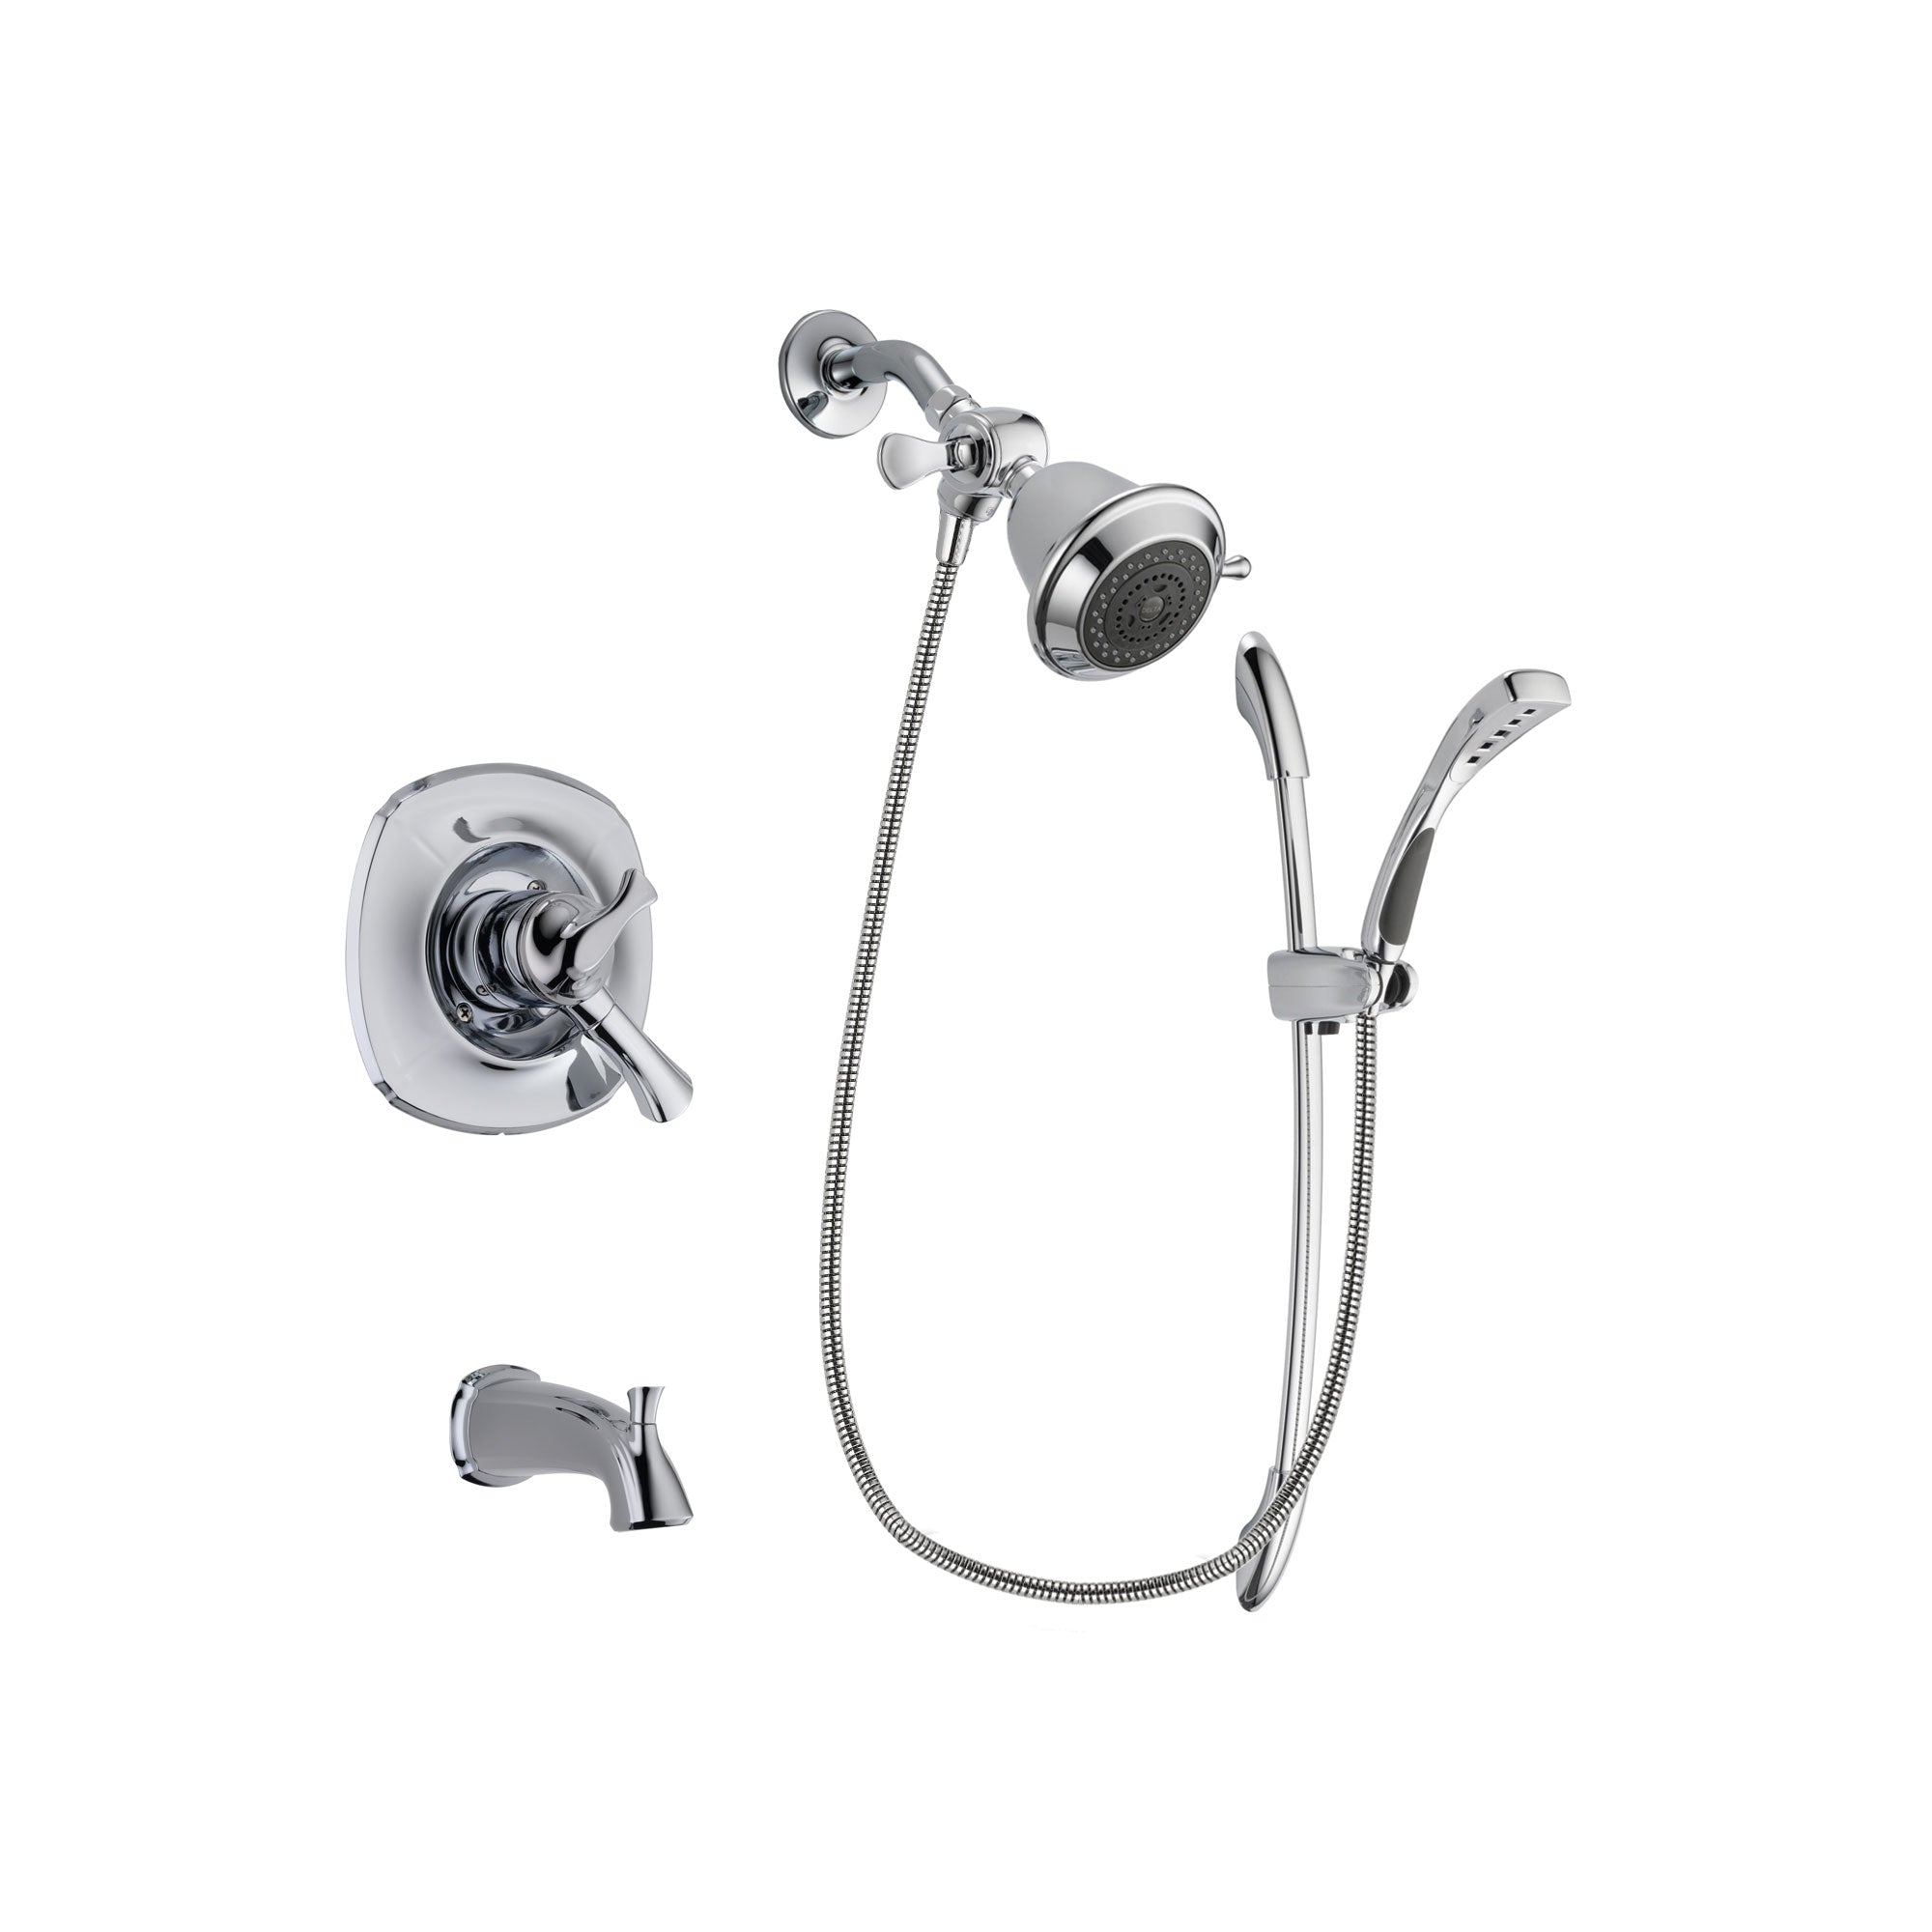 Delta Addison Chrome Finish Dual Control Tub and Shower Faucet System Package with Shower Head and Handheld Shower with Slide Bar Includes Rough-in Valve and Tub Spout DSP0453V